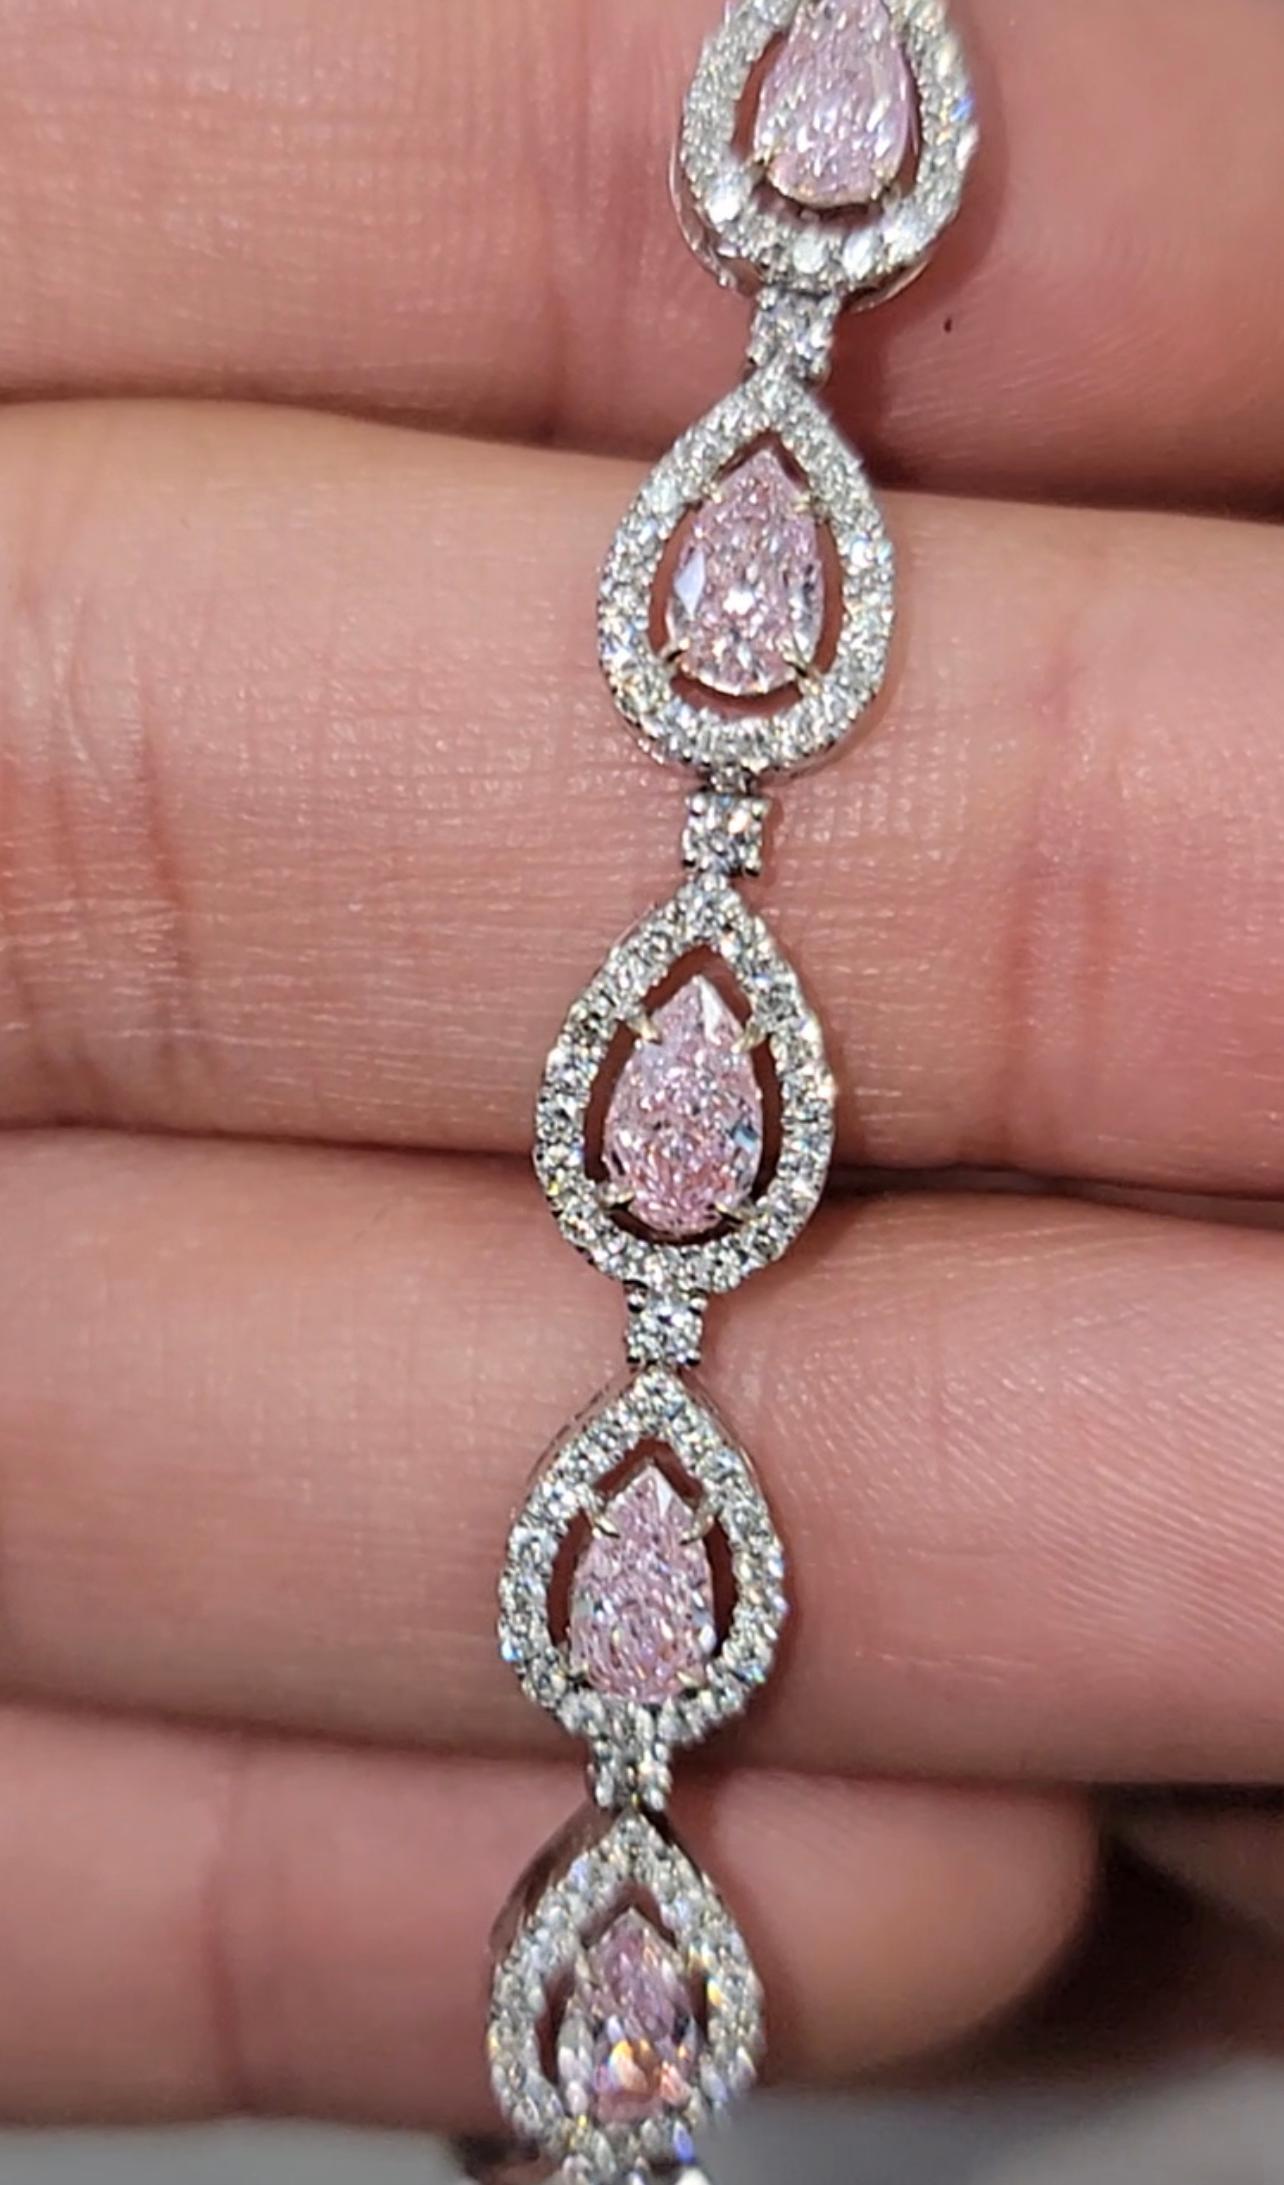 Gorgeous bracelet with 4.59cts of Pink Diamond Pear shapes with sweet color, full of life and no bow ties
2.22ct of white rounds

Making Extraordinary Attainable with Rare Colors
